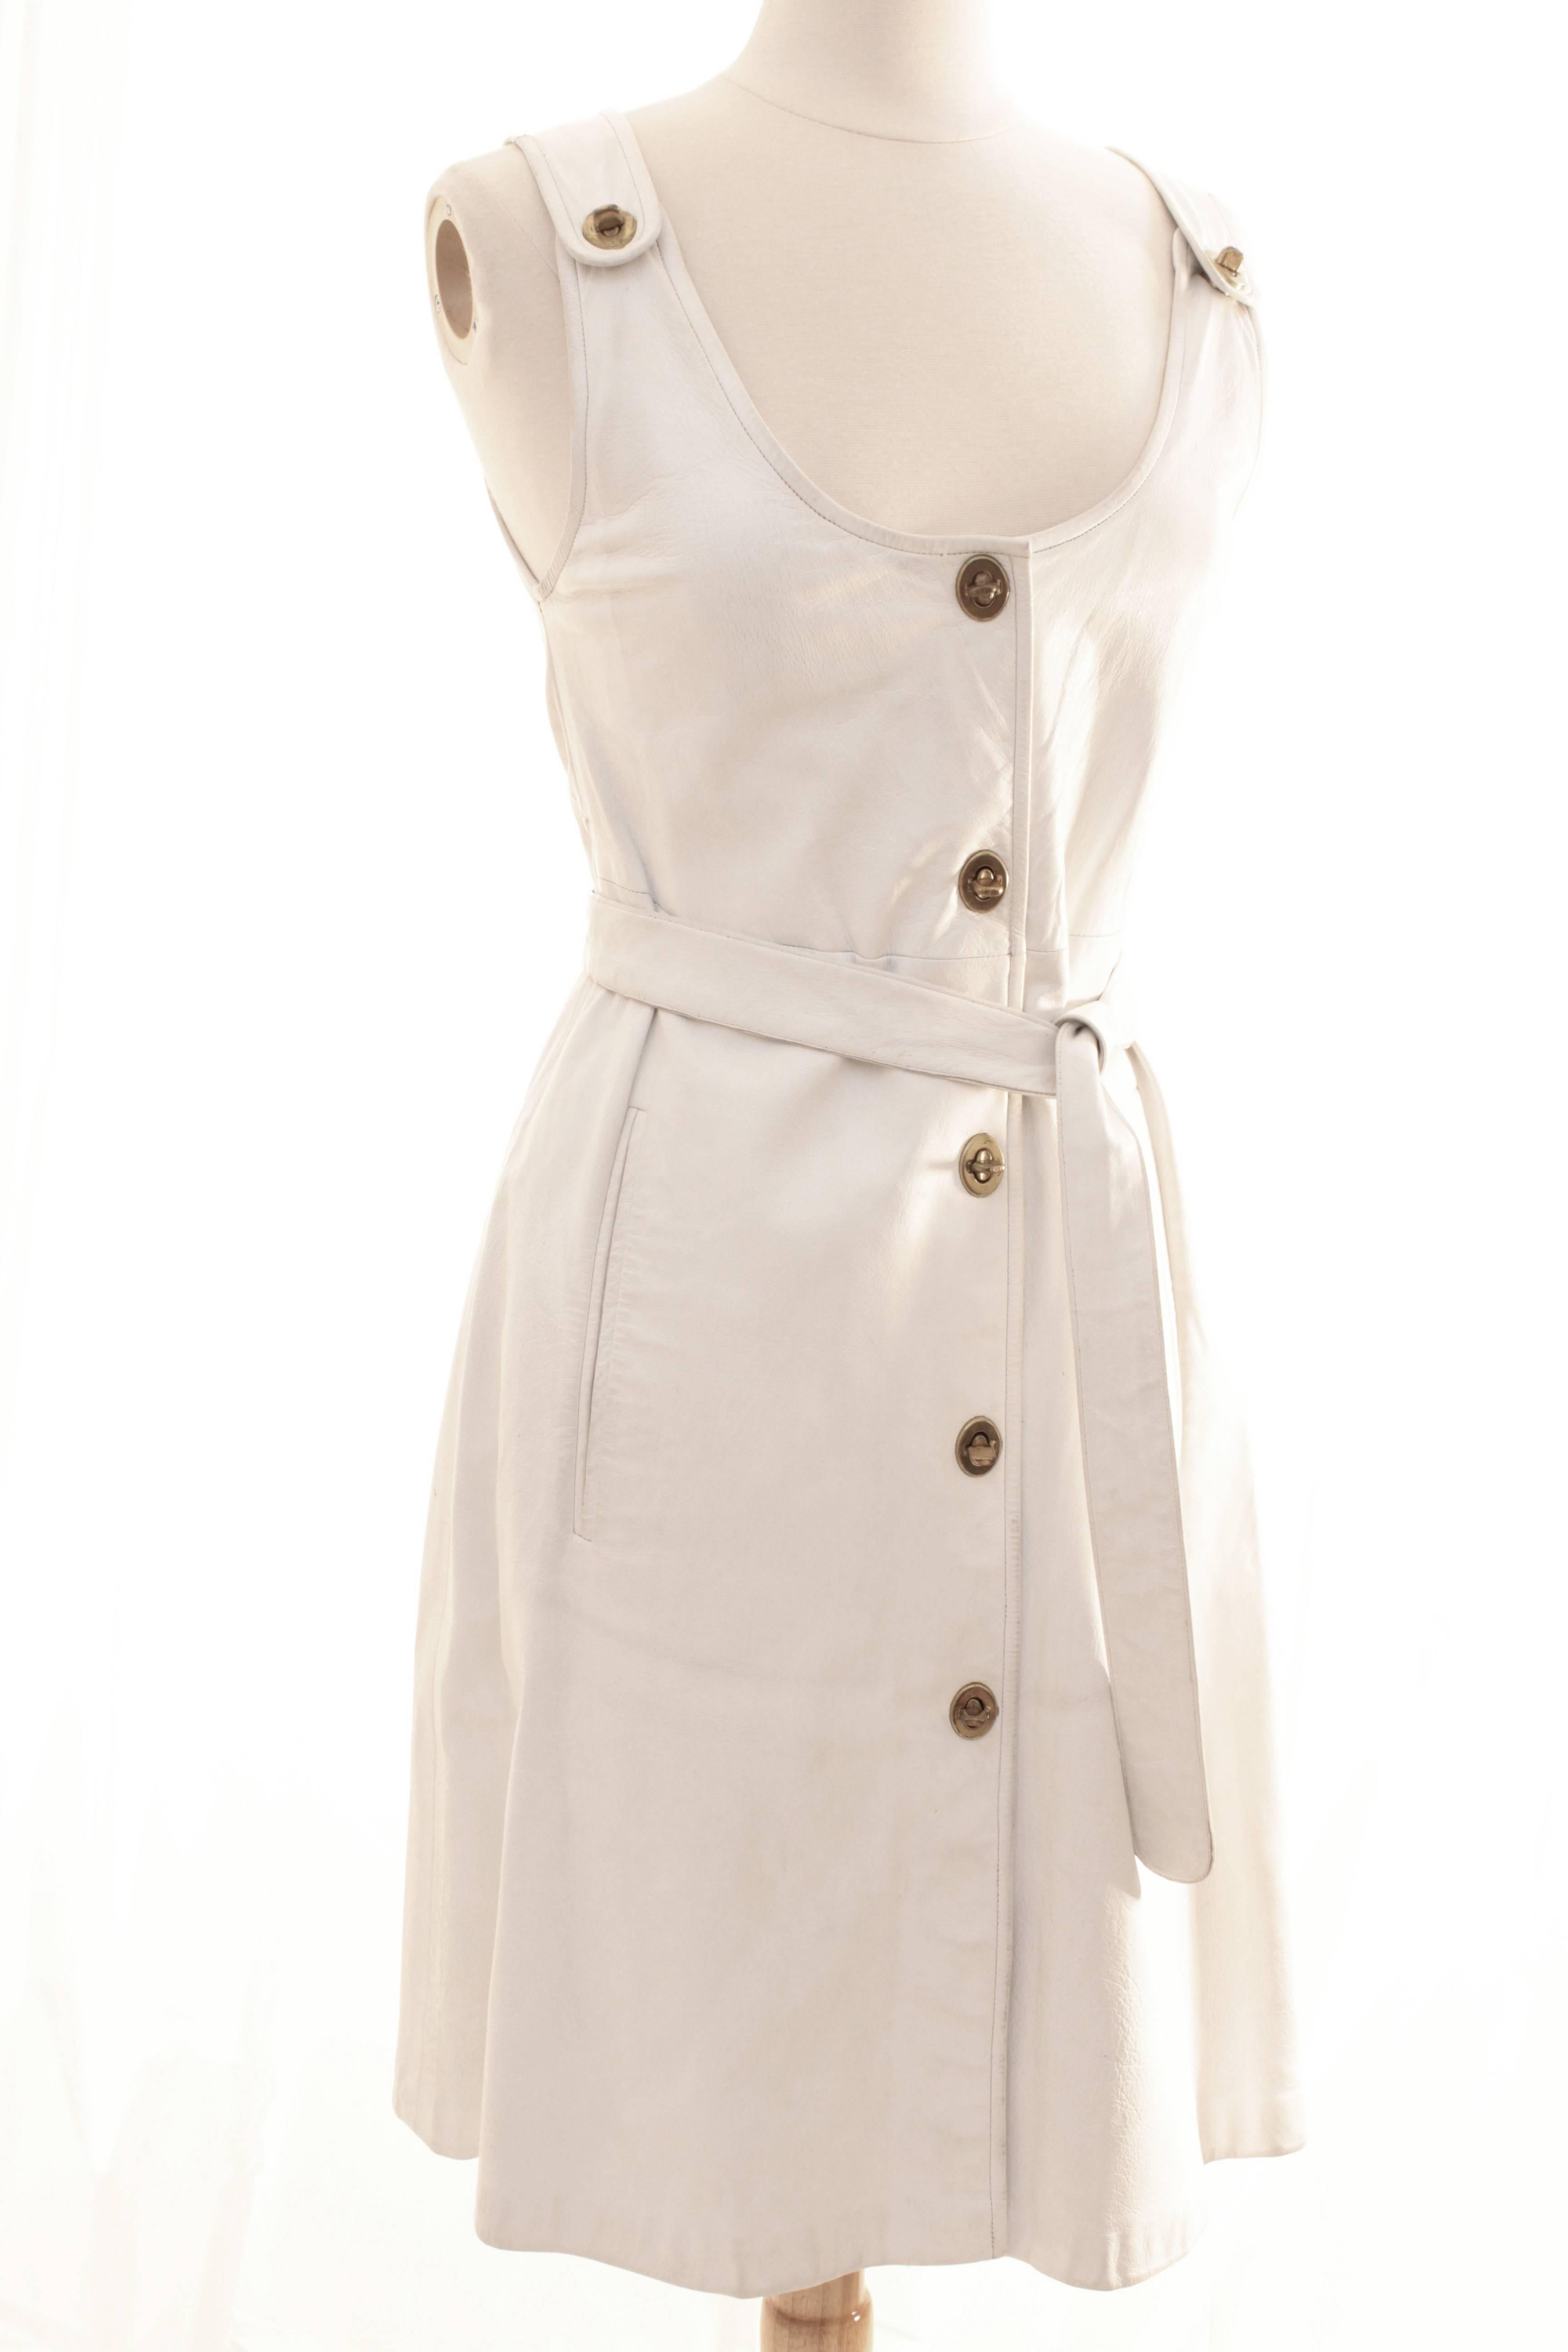 Mod Bonnie Cashin White Leather Mini Dress Set with Matching Belt & Gloves 60s M In Good Condition In Port Saint Lucie, FL